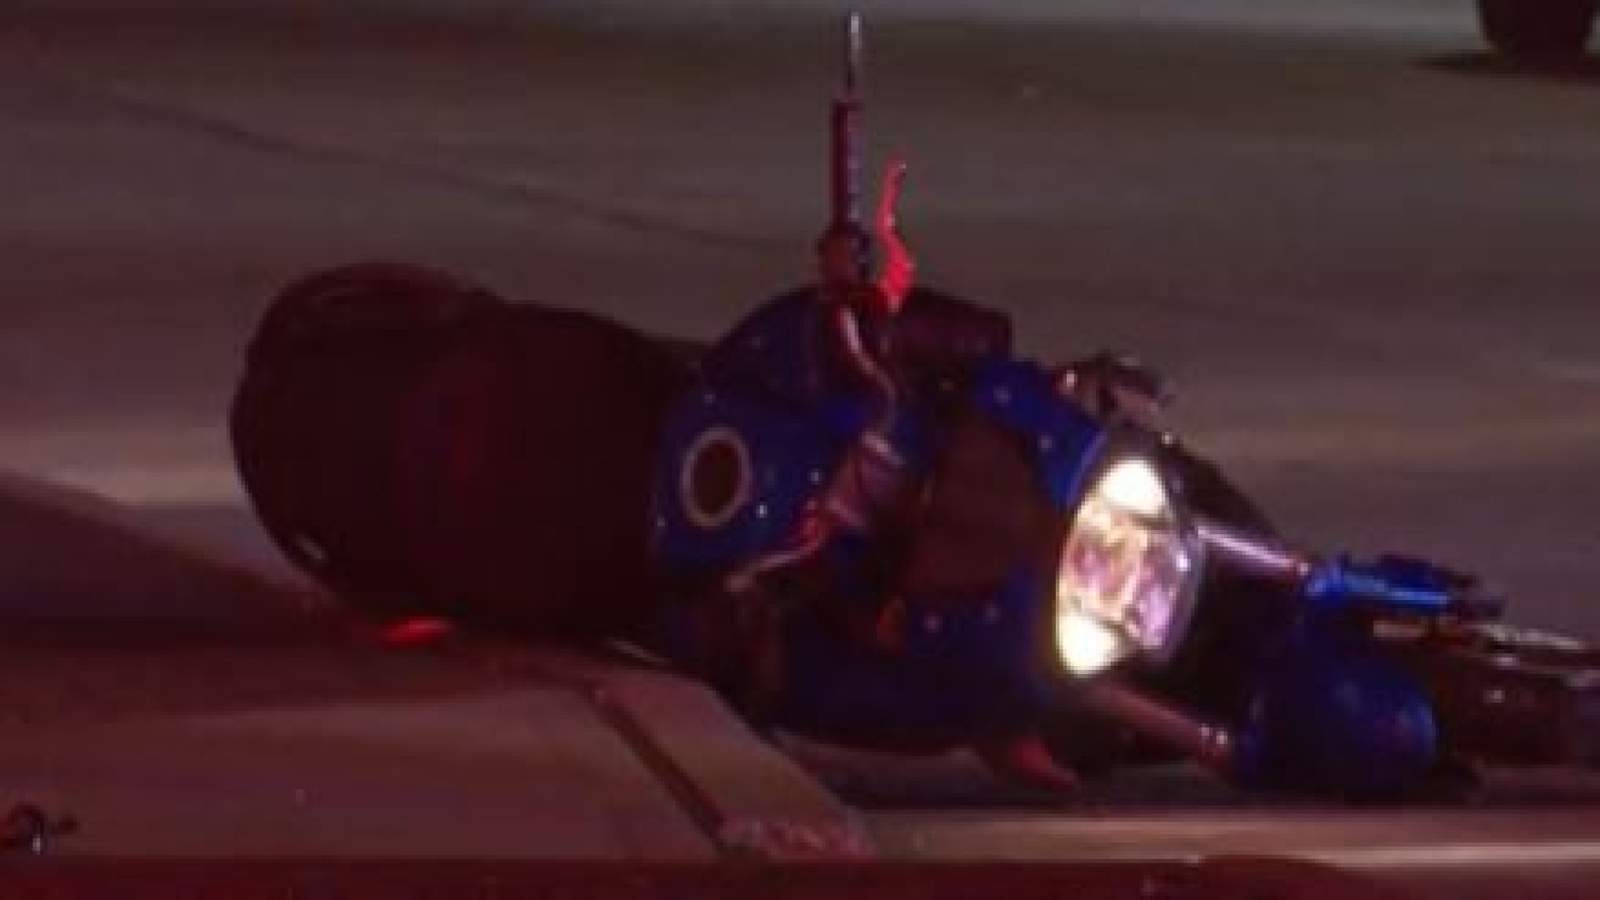 Motorcyclist killed during crash in west Houston, police say